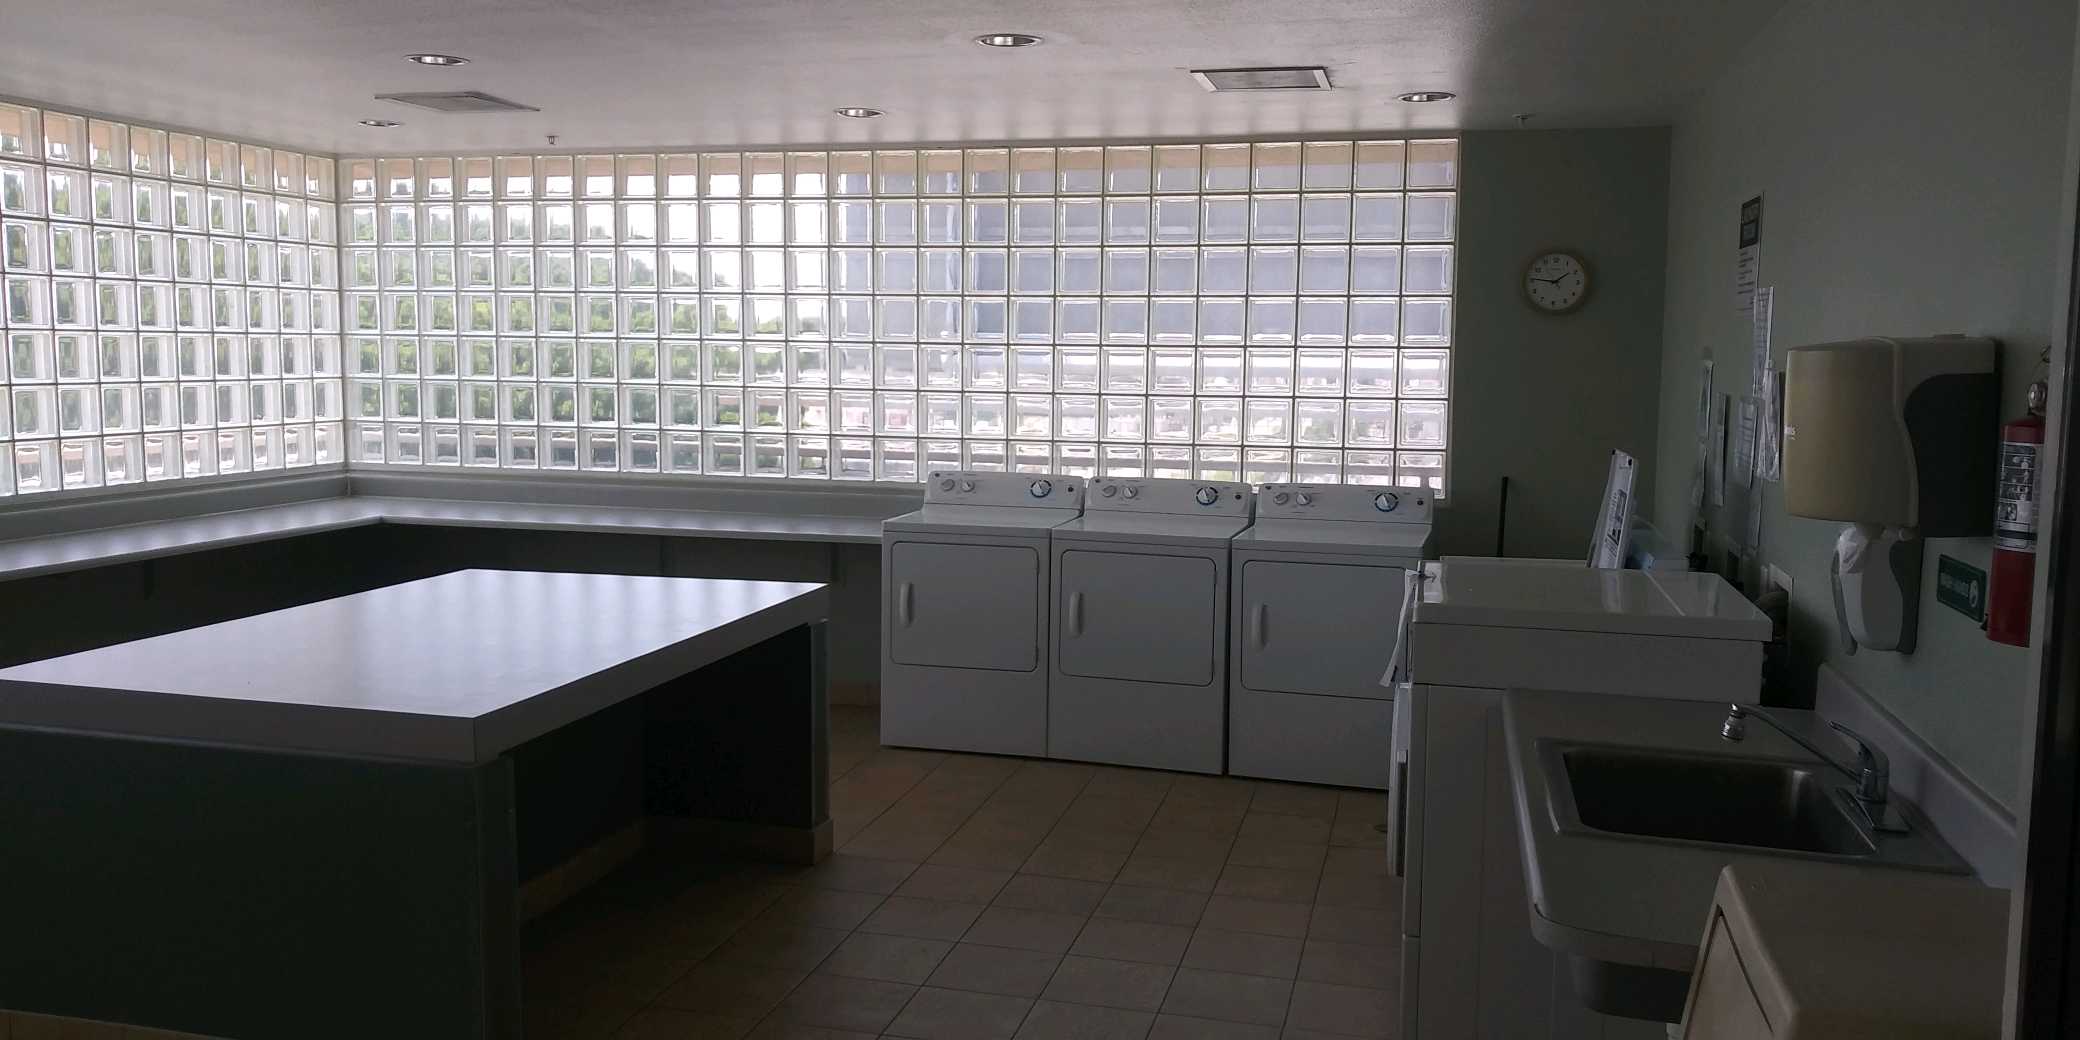 Laundry room with multiple washers and dryers. Center has a folding table. There is a large tiled window on two sides of the wall amd a shelf alongside it. On the adjacent wall there are laundry room rules and signs posted. Thre is a sink, soap dispenser,